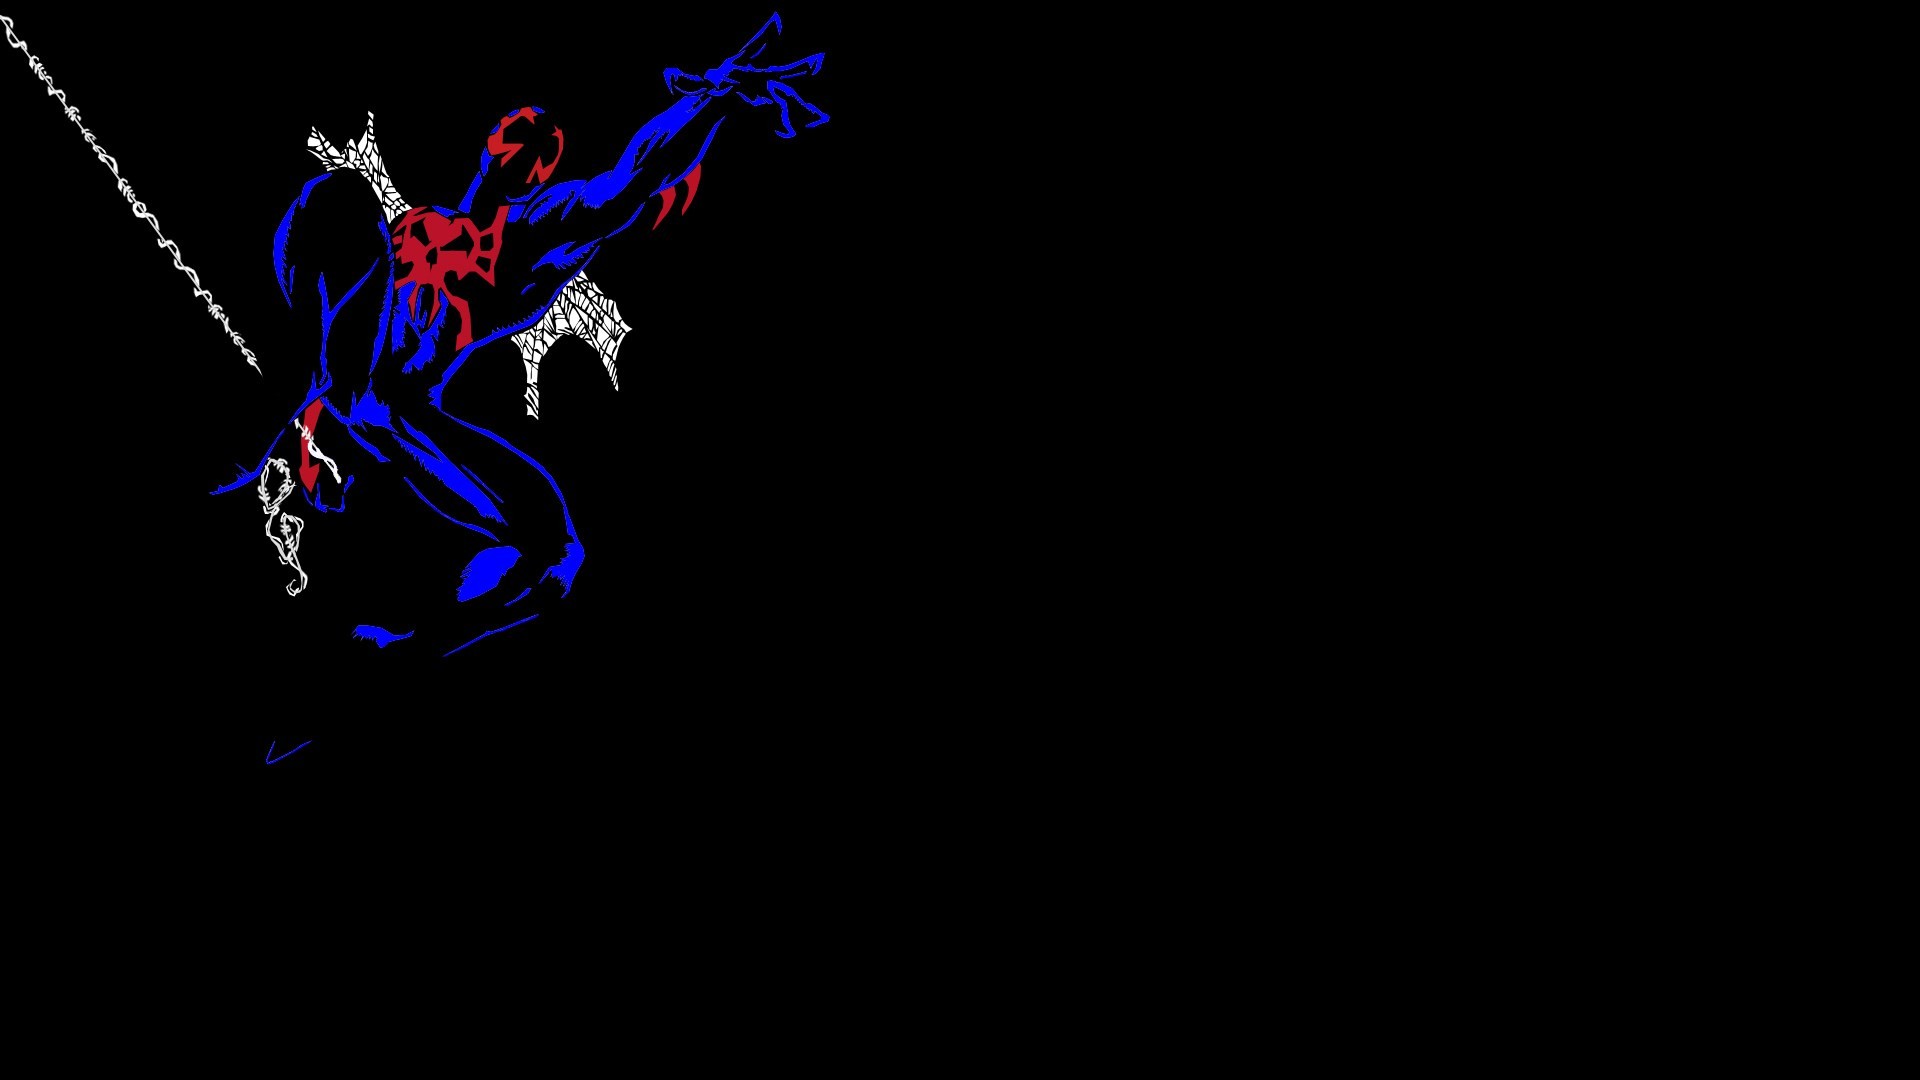 1920x1080 spider man 2099 theme picture by Gauge Kingsman (2017-03-09)